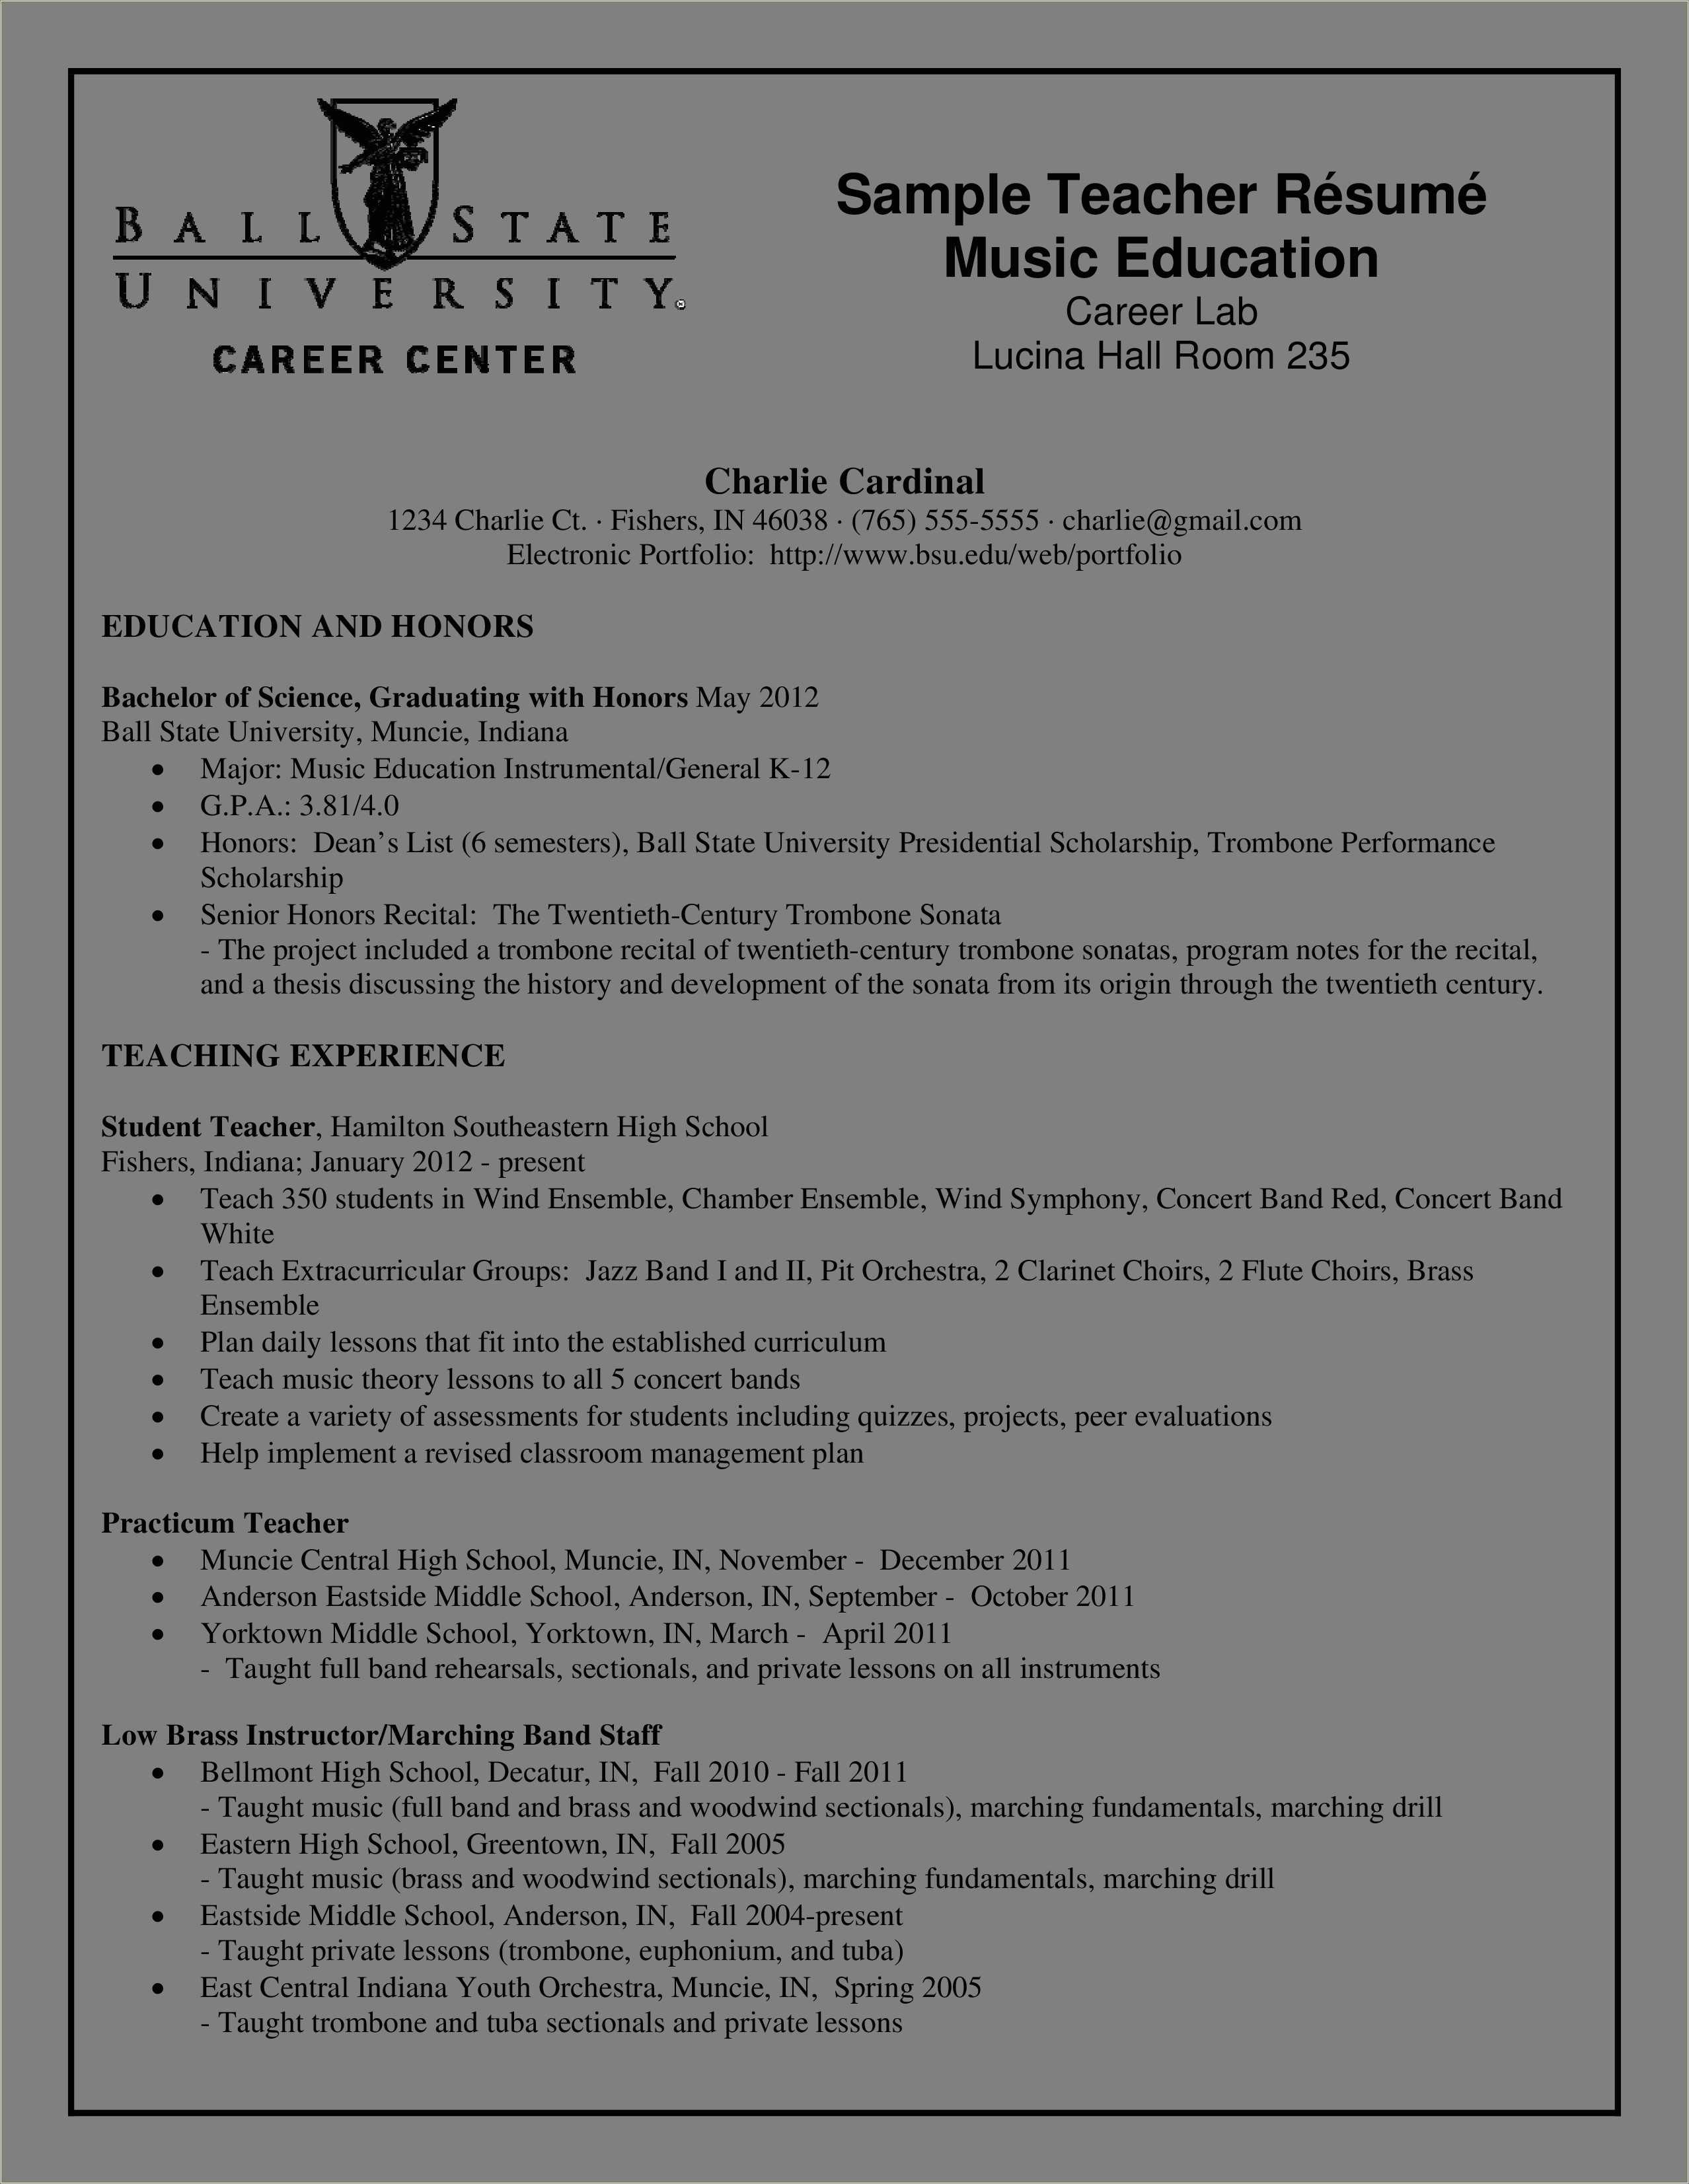 Example Of Music Education Resume